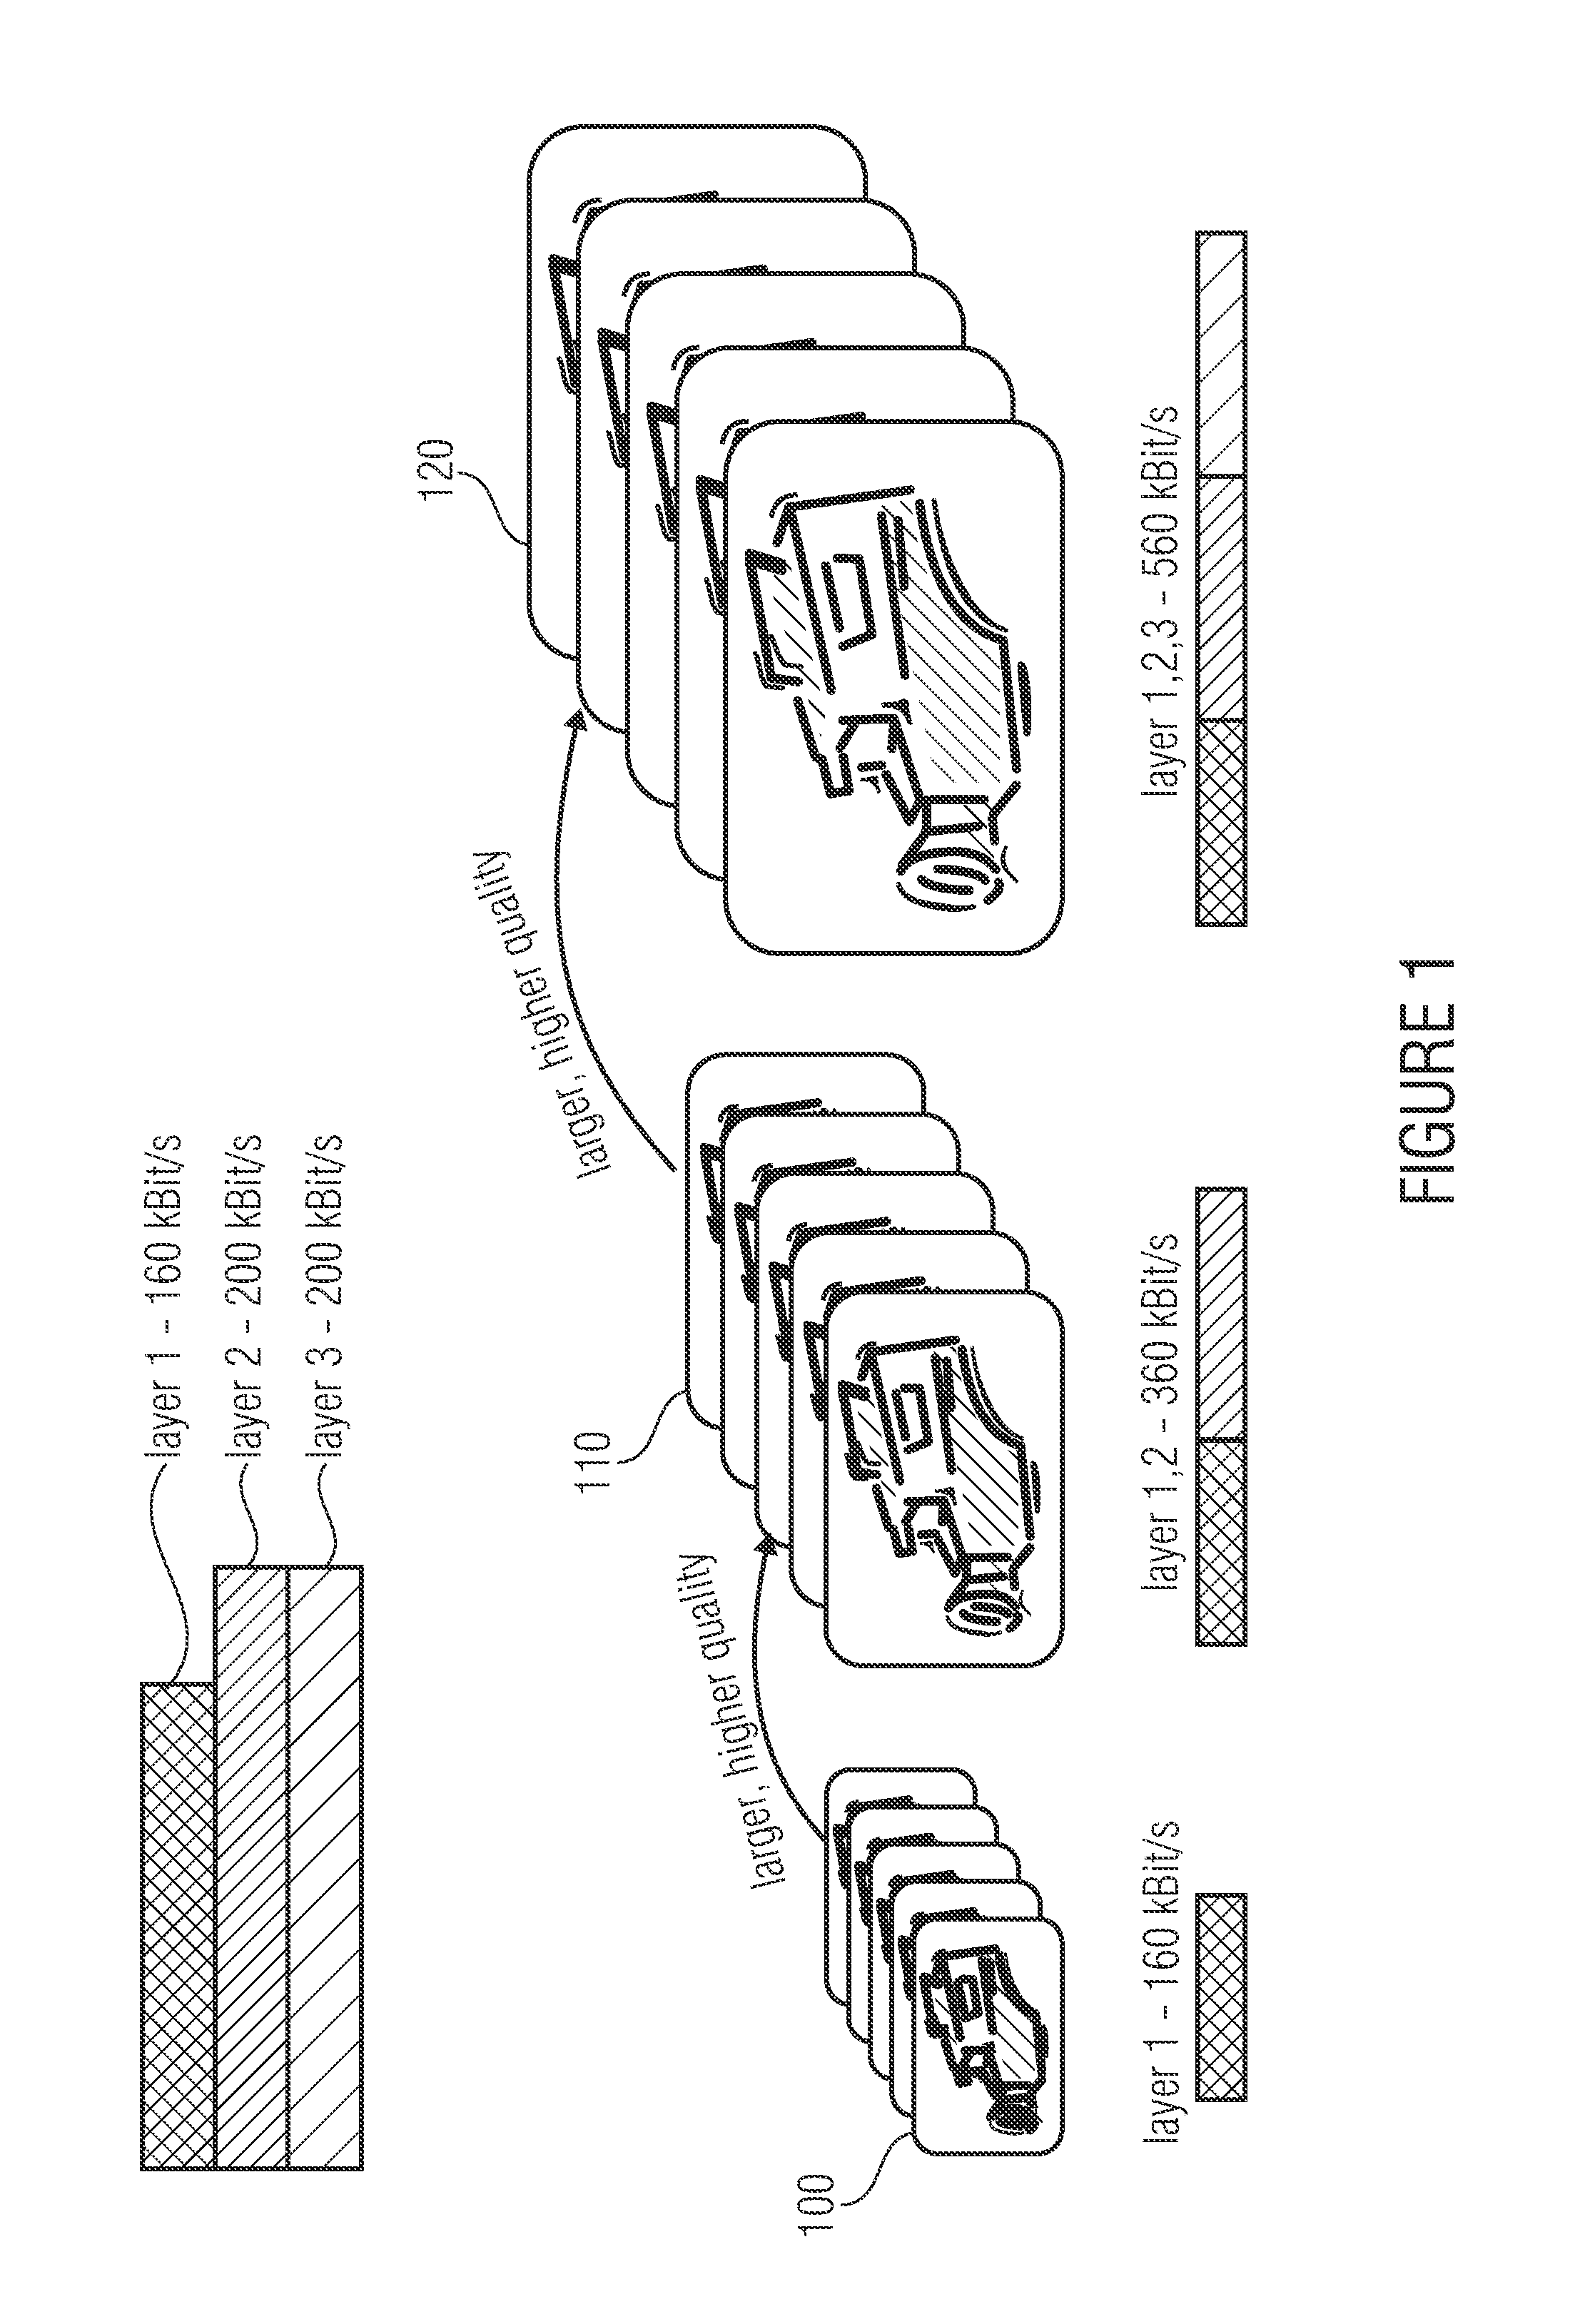 Apparatus for assigning and estimating transmission symbols